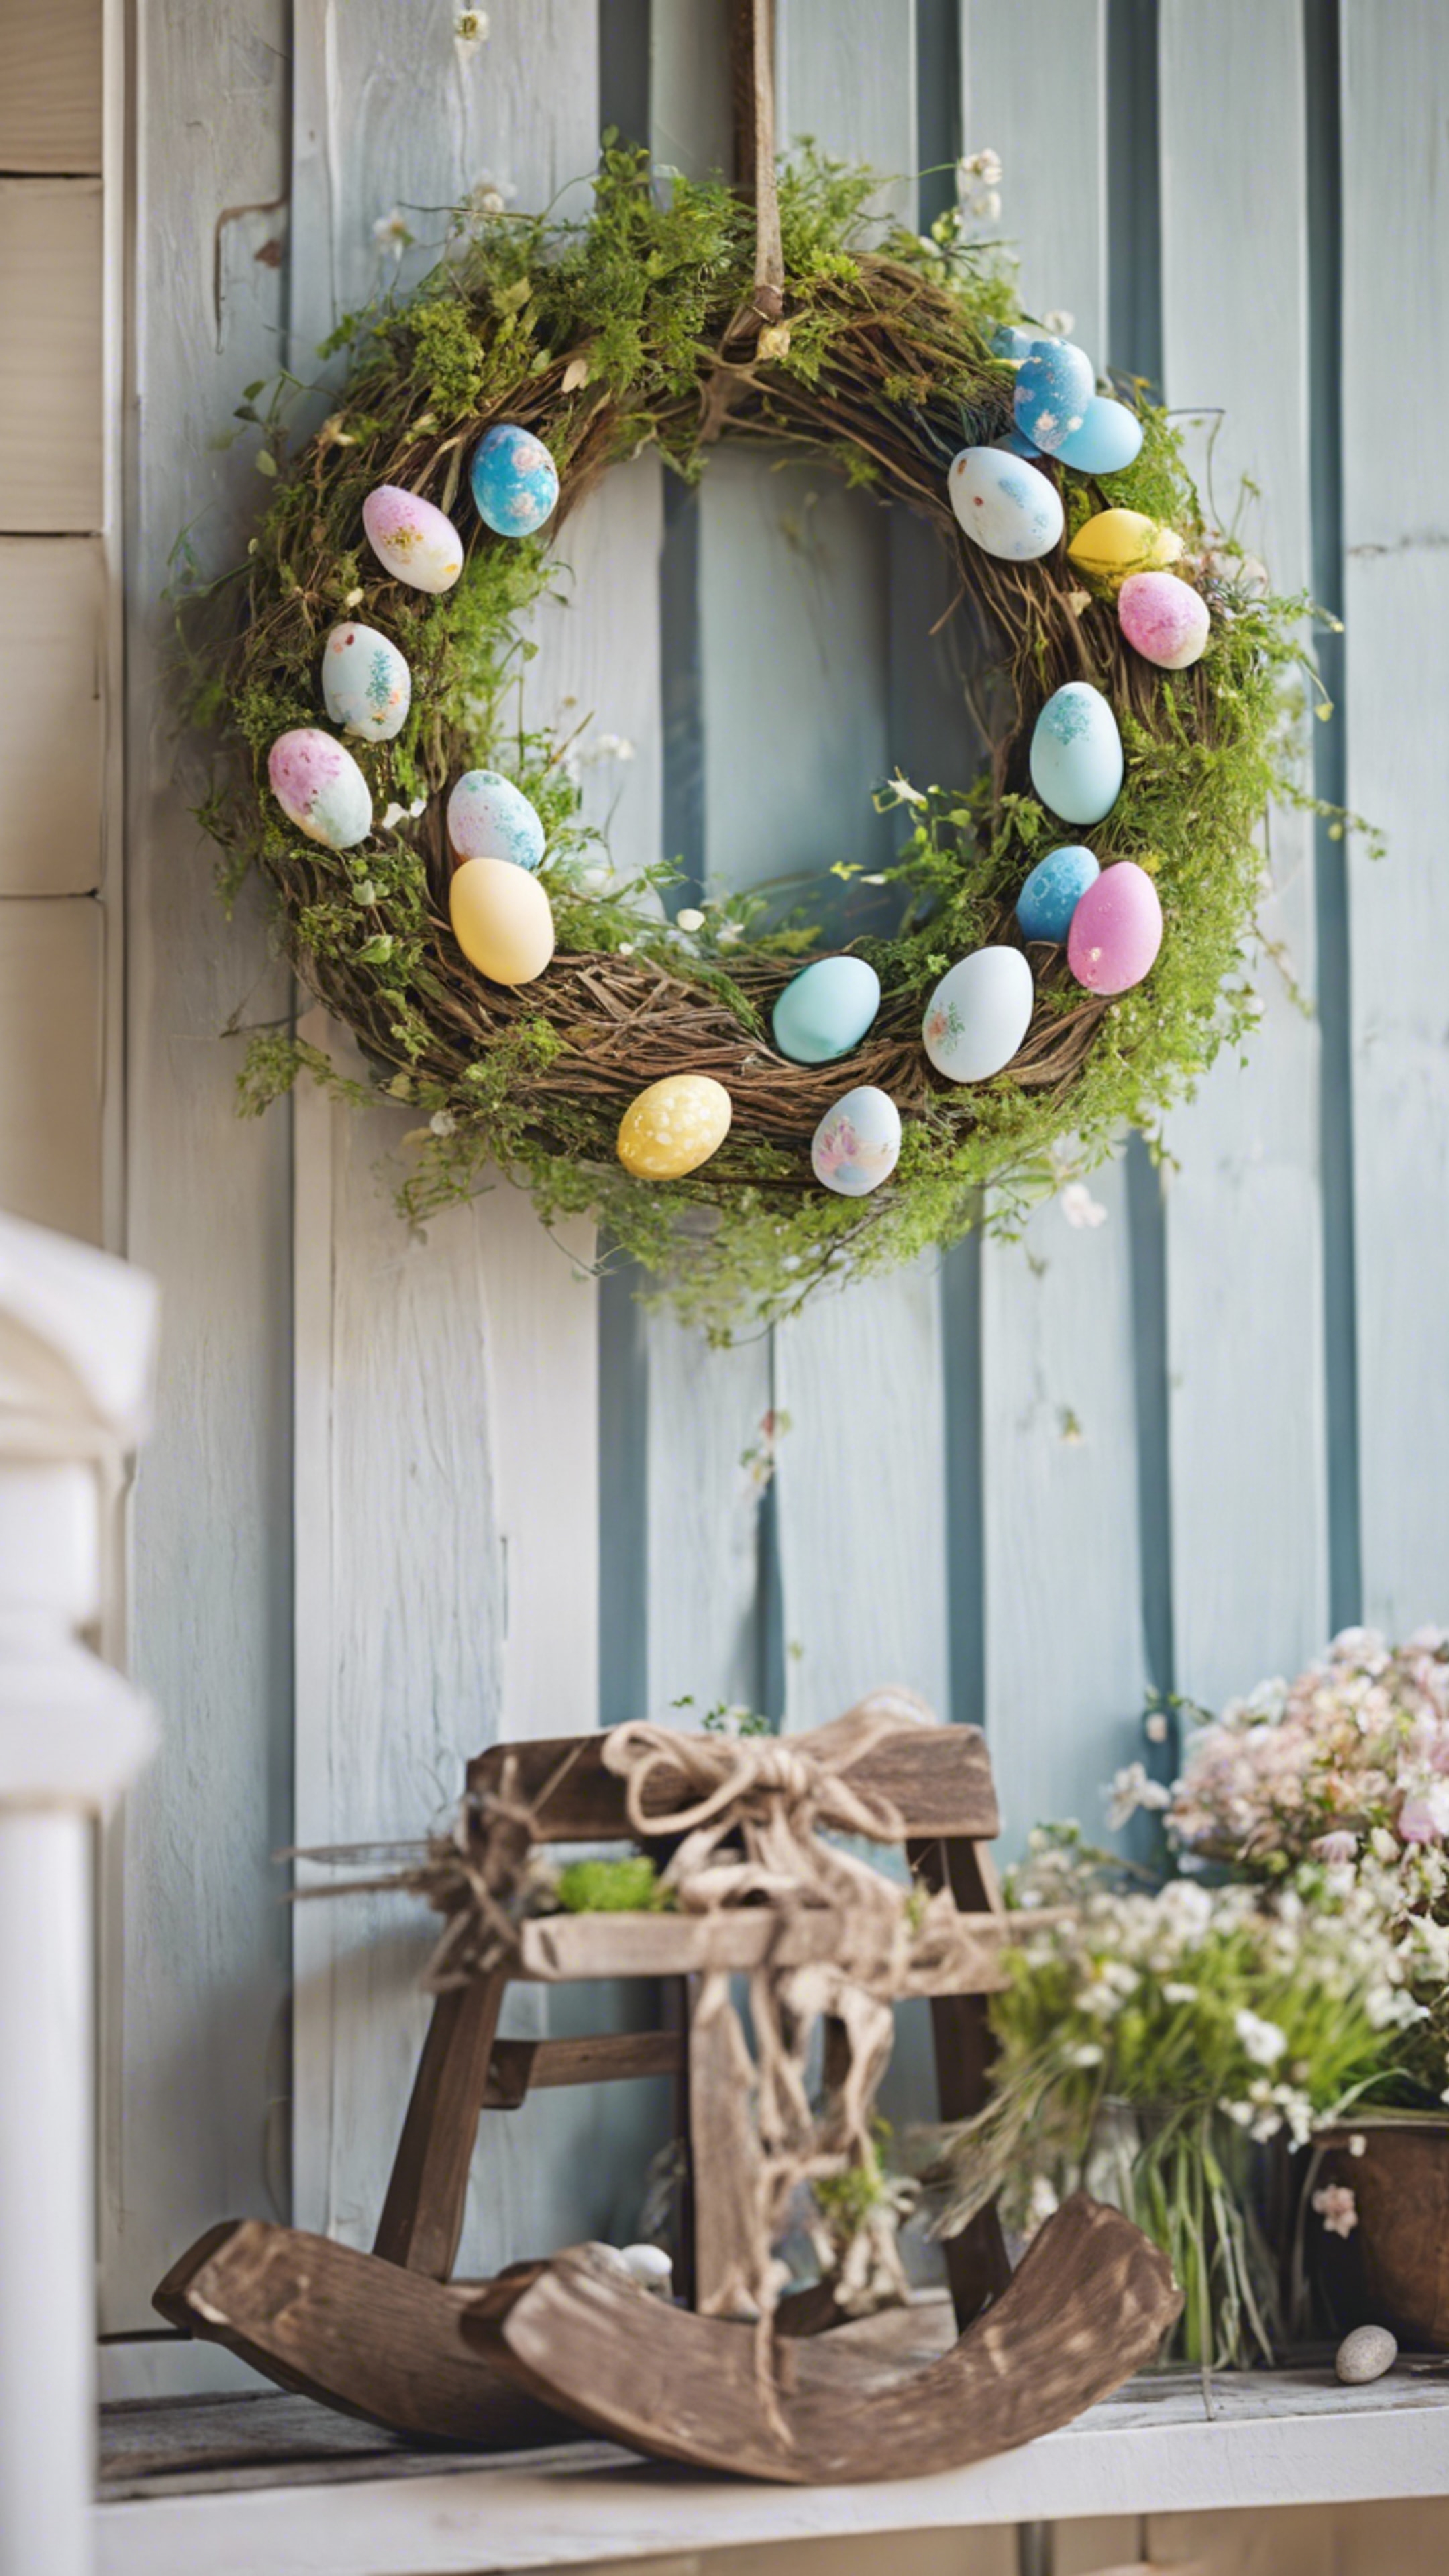 Country-style Easter decorative wreath hanging on a front porch, inviting the spring spirits. 墙纸[efa72fd9539f4de39955]